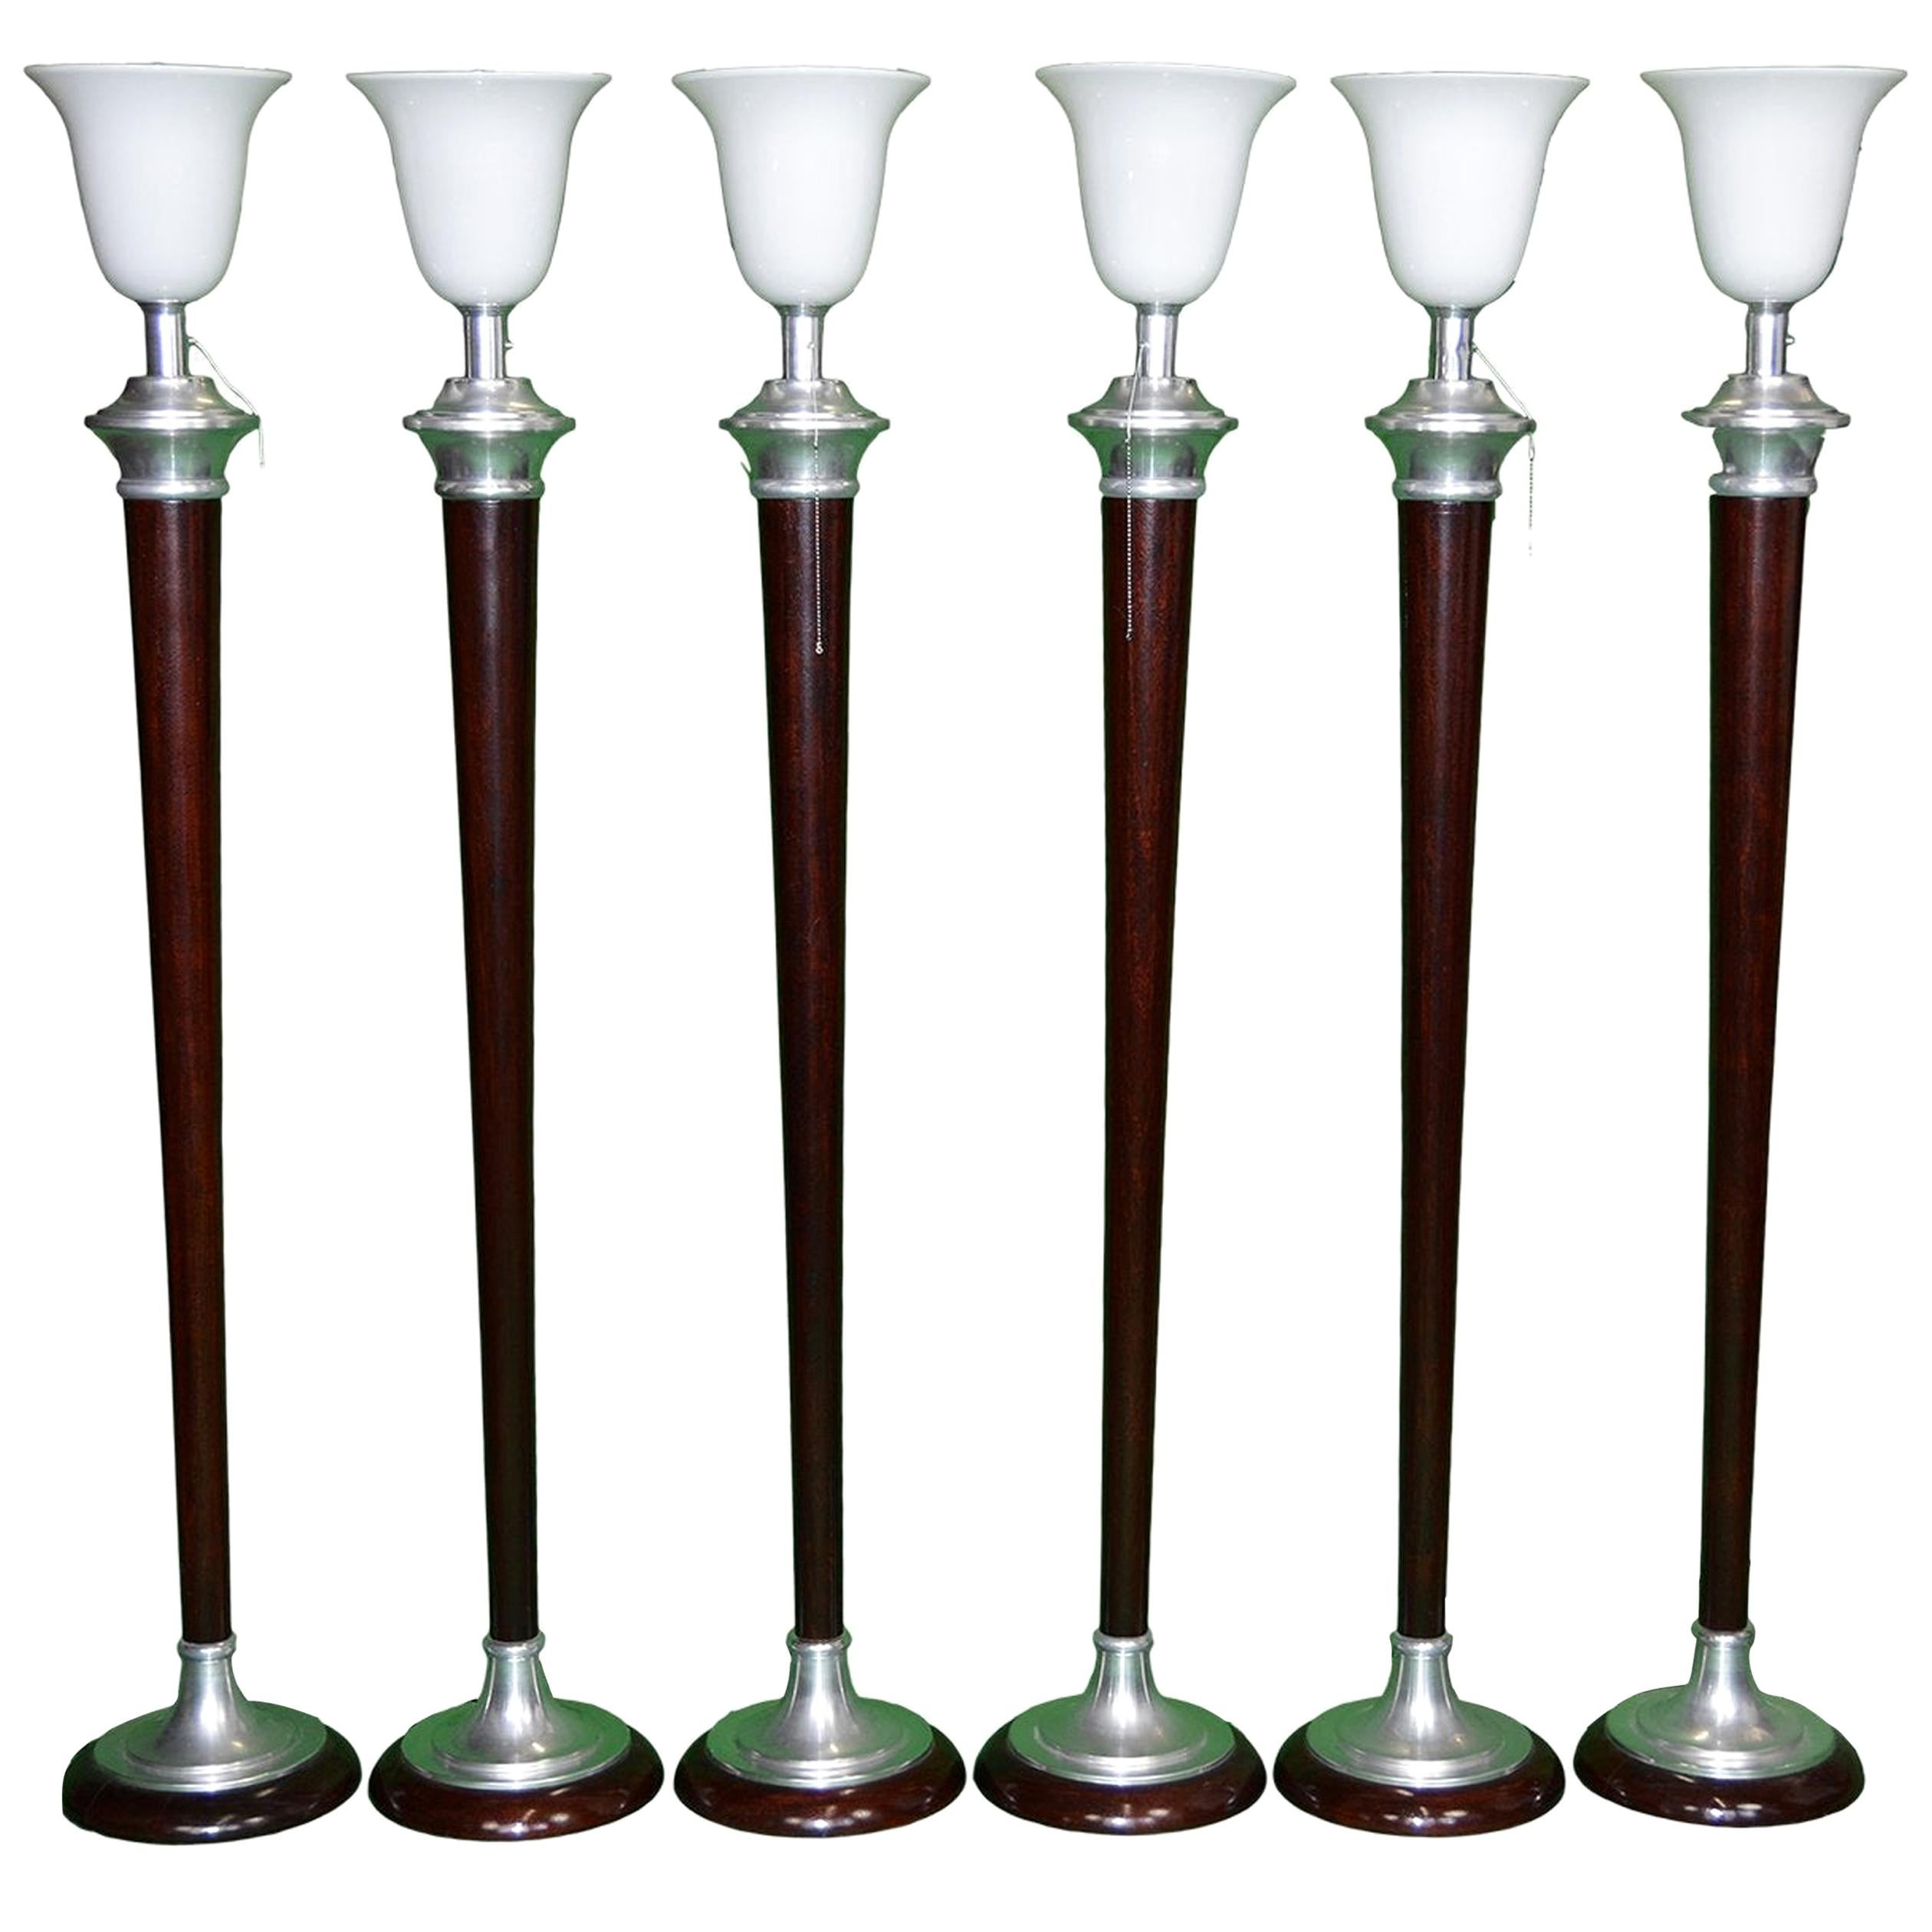 1930 French Art Deco Mazda Floor Lamps Opaline Shade, Set of 6 Torchiere Lamps